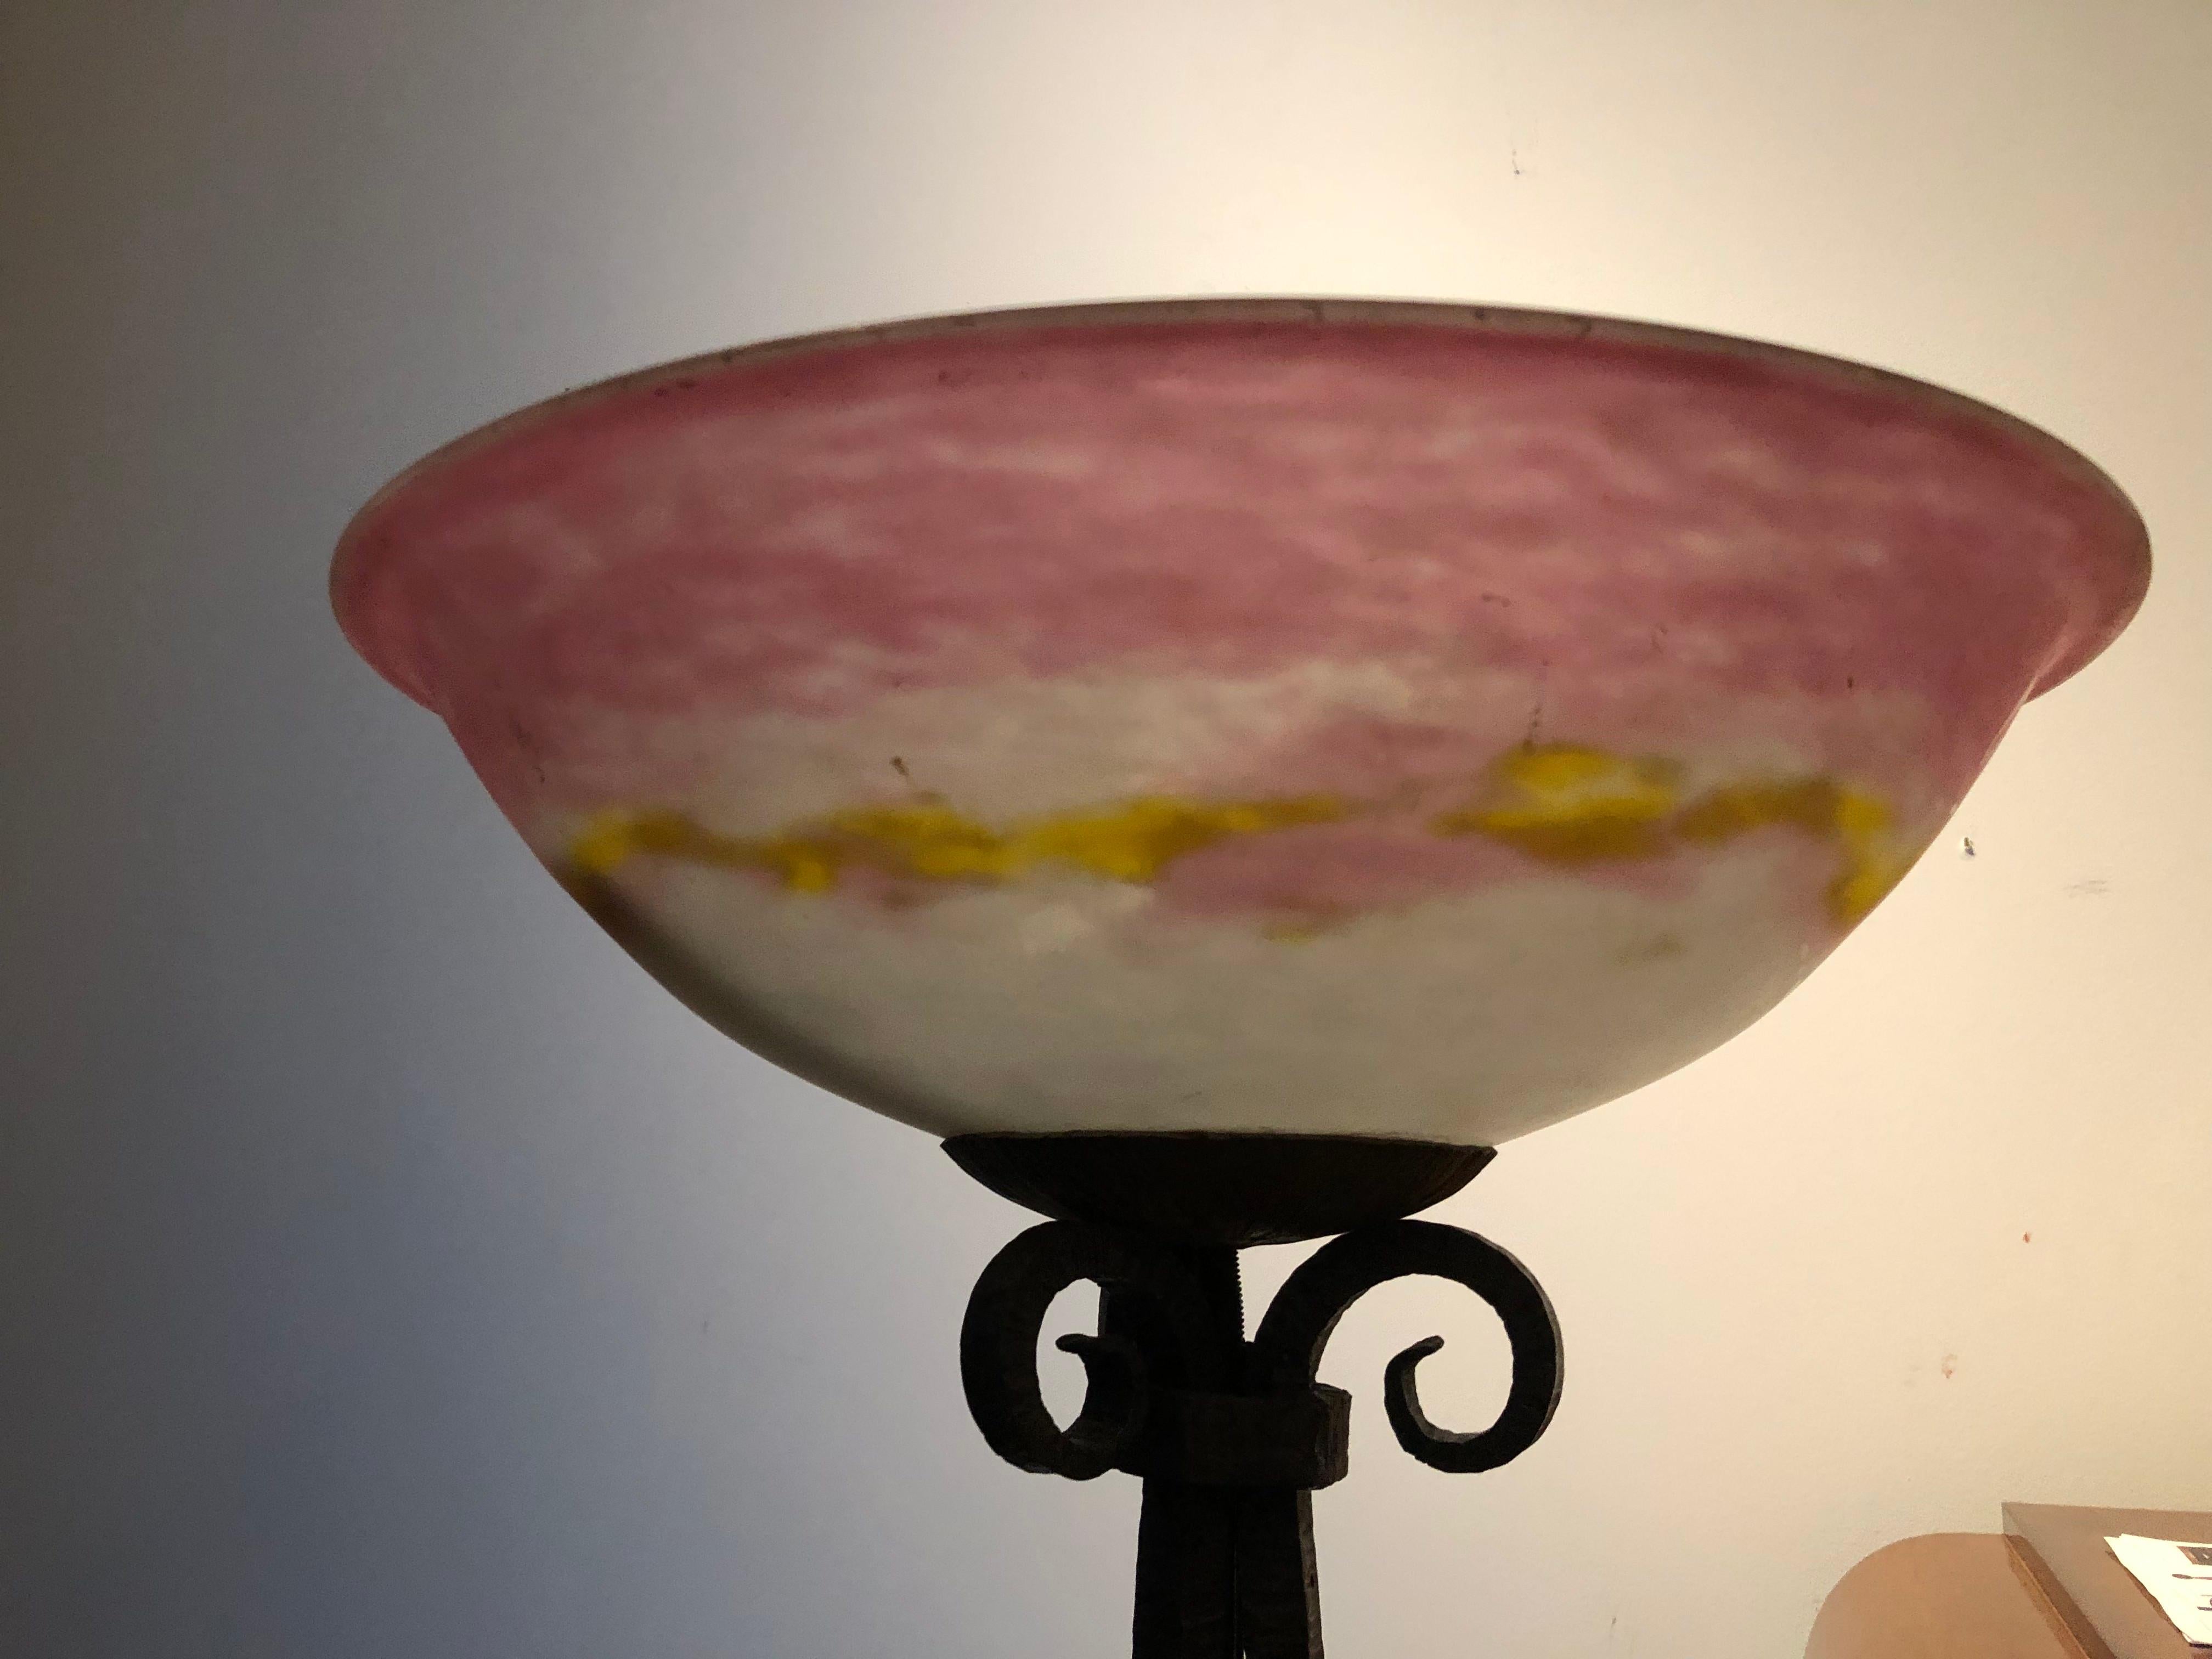 A Muller Frères glass and wrought iron floor lamp in colorless glass with pink and yellow powders on a patinated wrought iron base decorated with vine branches. Glass marked Muller Frères Luneville.